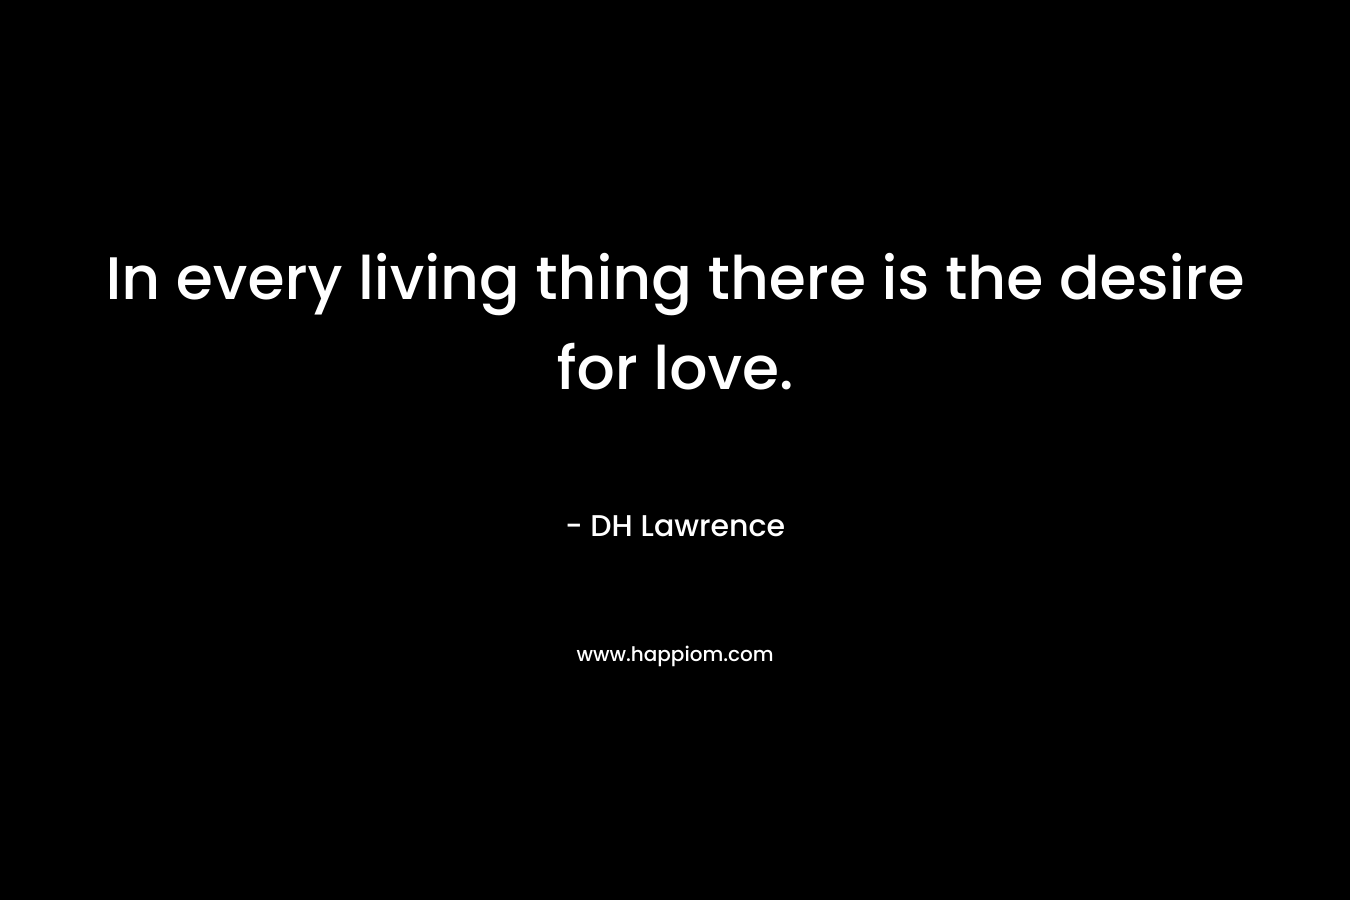 In every living thing there is the desire for love. – DH Lawrence